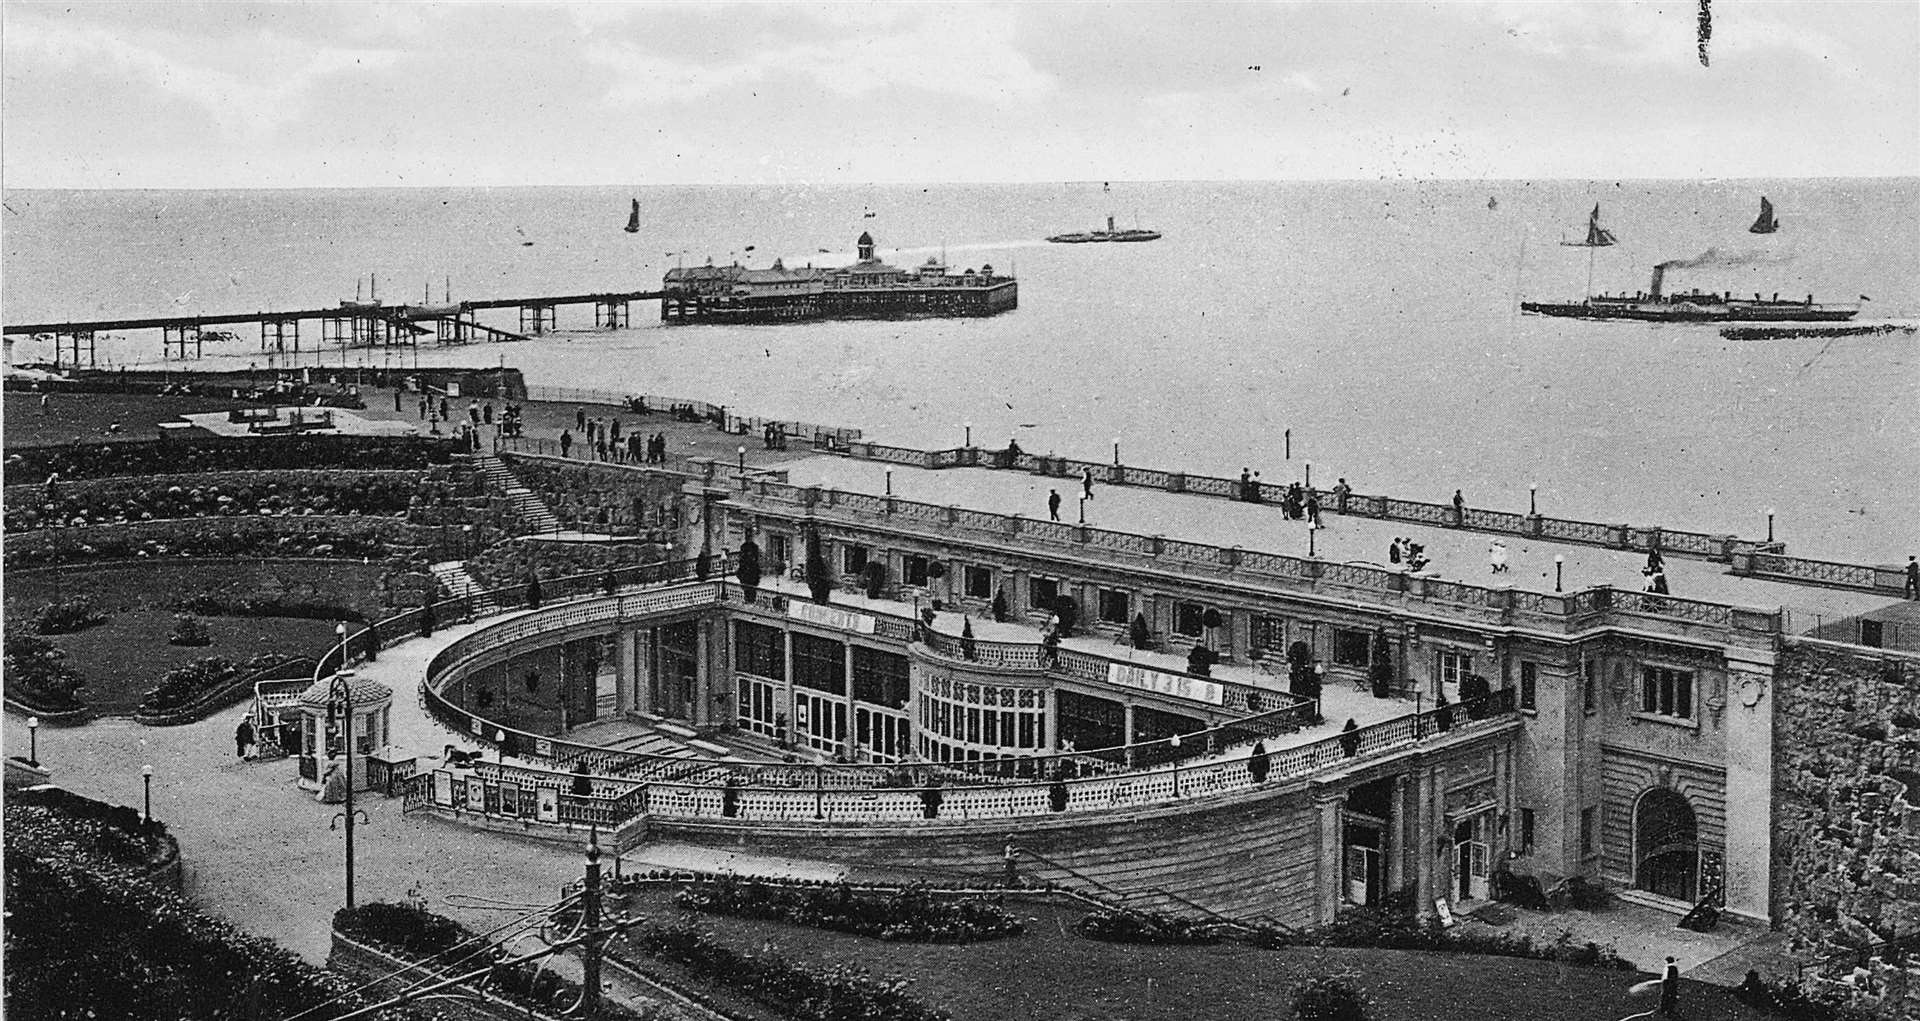 An old picture of Margate showing the Winter Gardens and Jetty